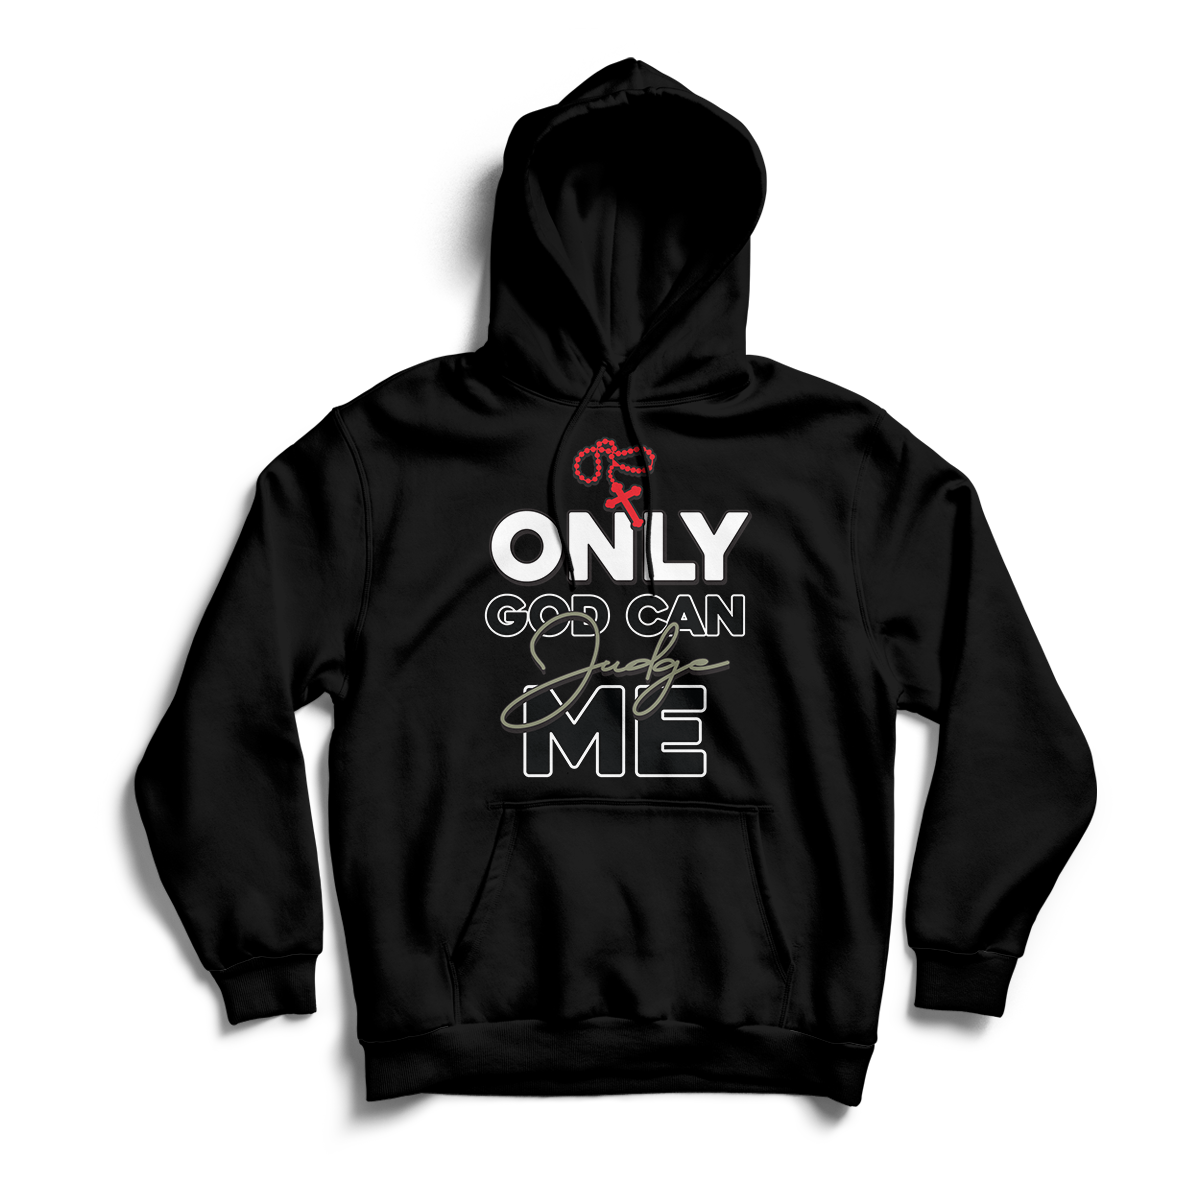 'Only God Can Judge Me' in Medium Olive CW Unisex Pullover Hoodie